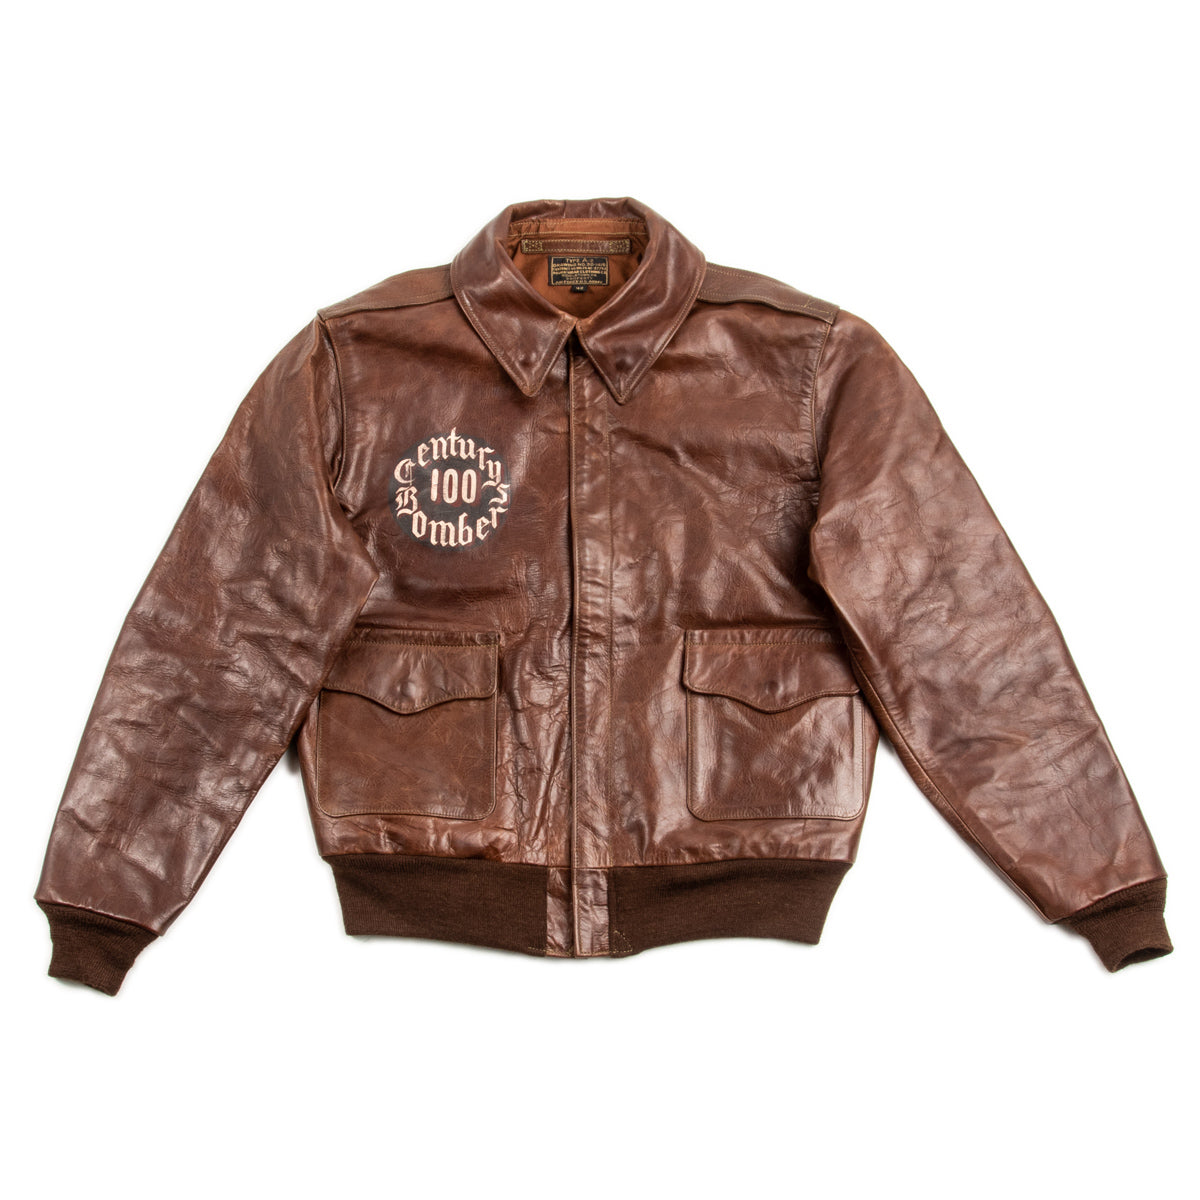 Eastman Leather Clothing Type A-1 Leather Cape Jacket - Contract